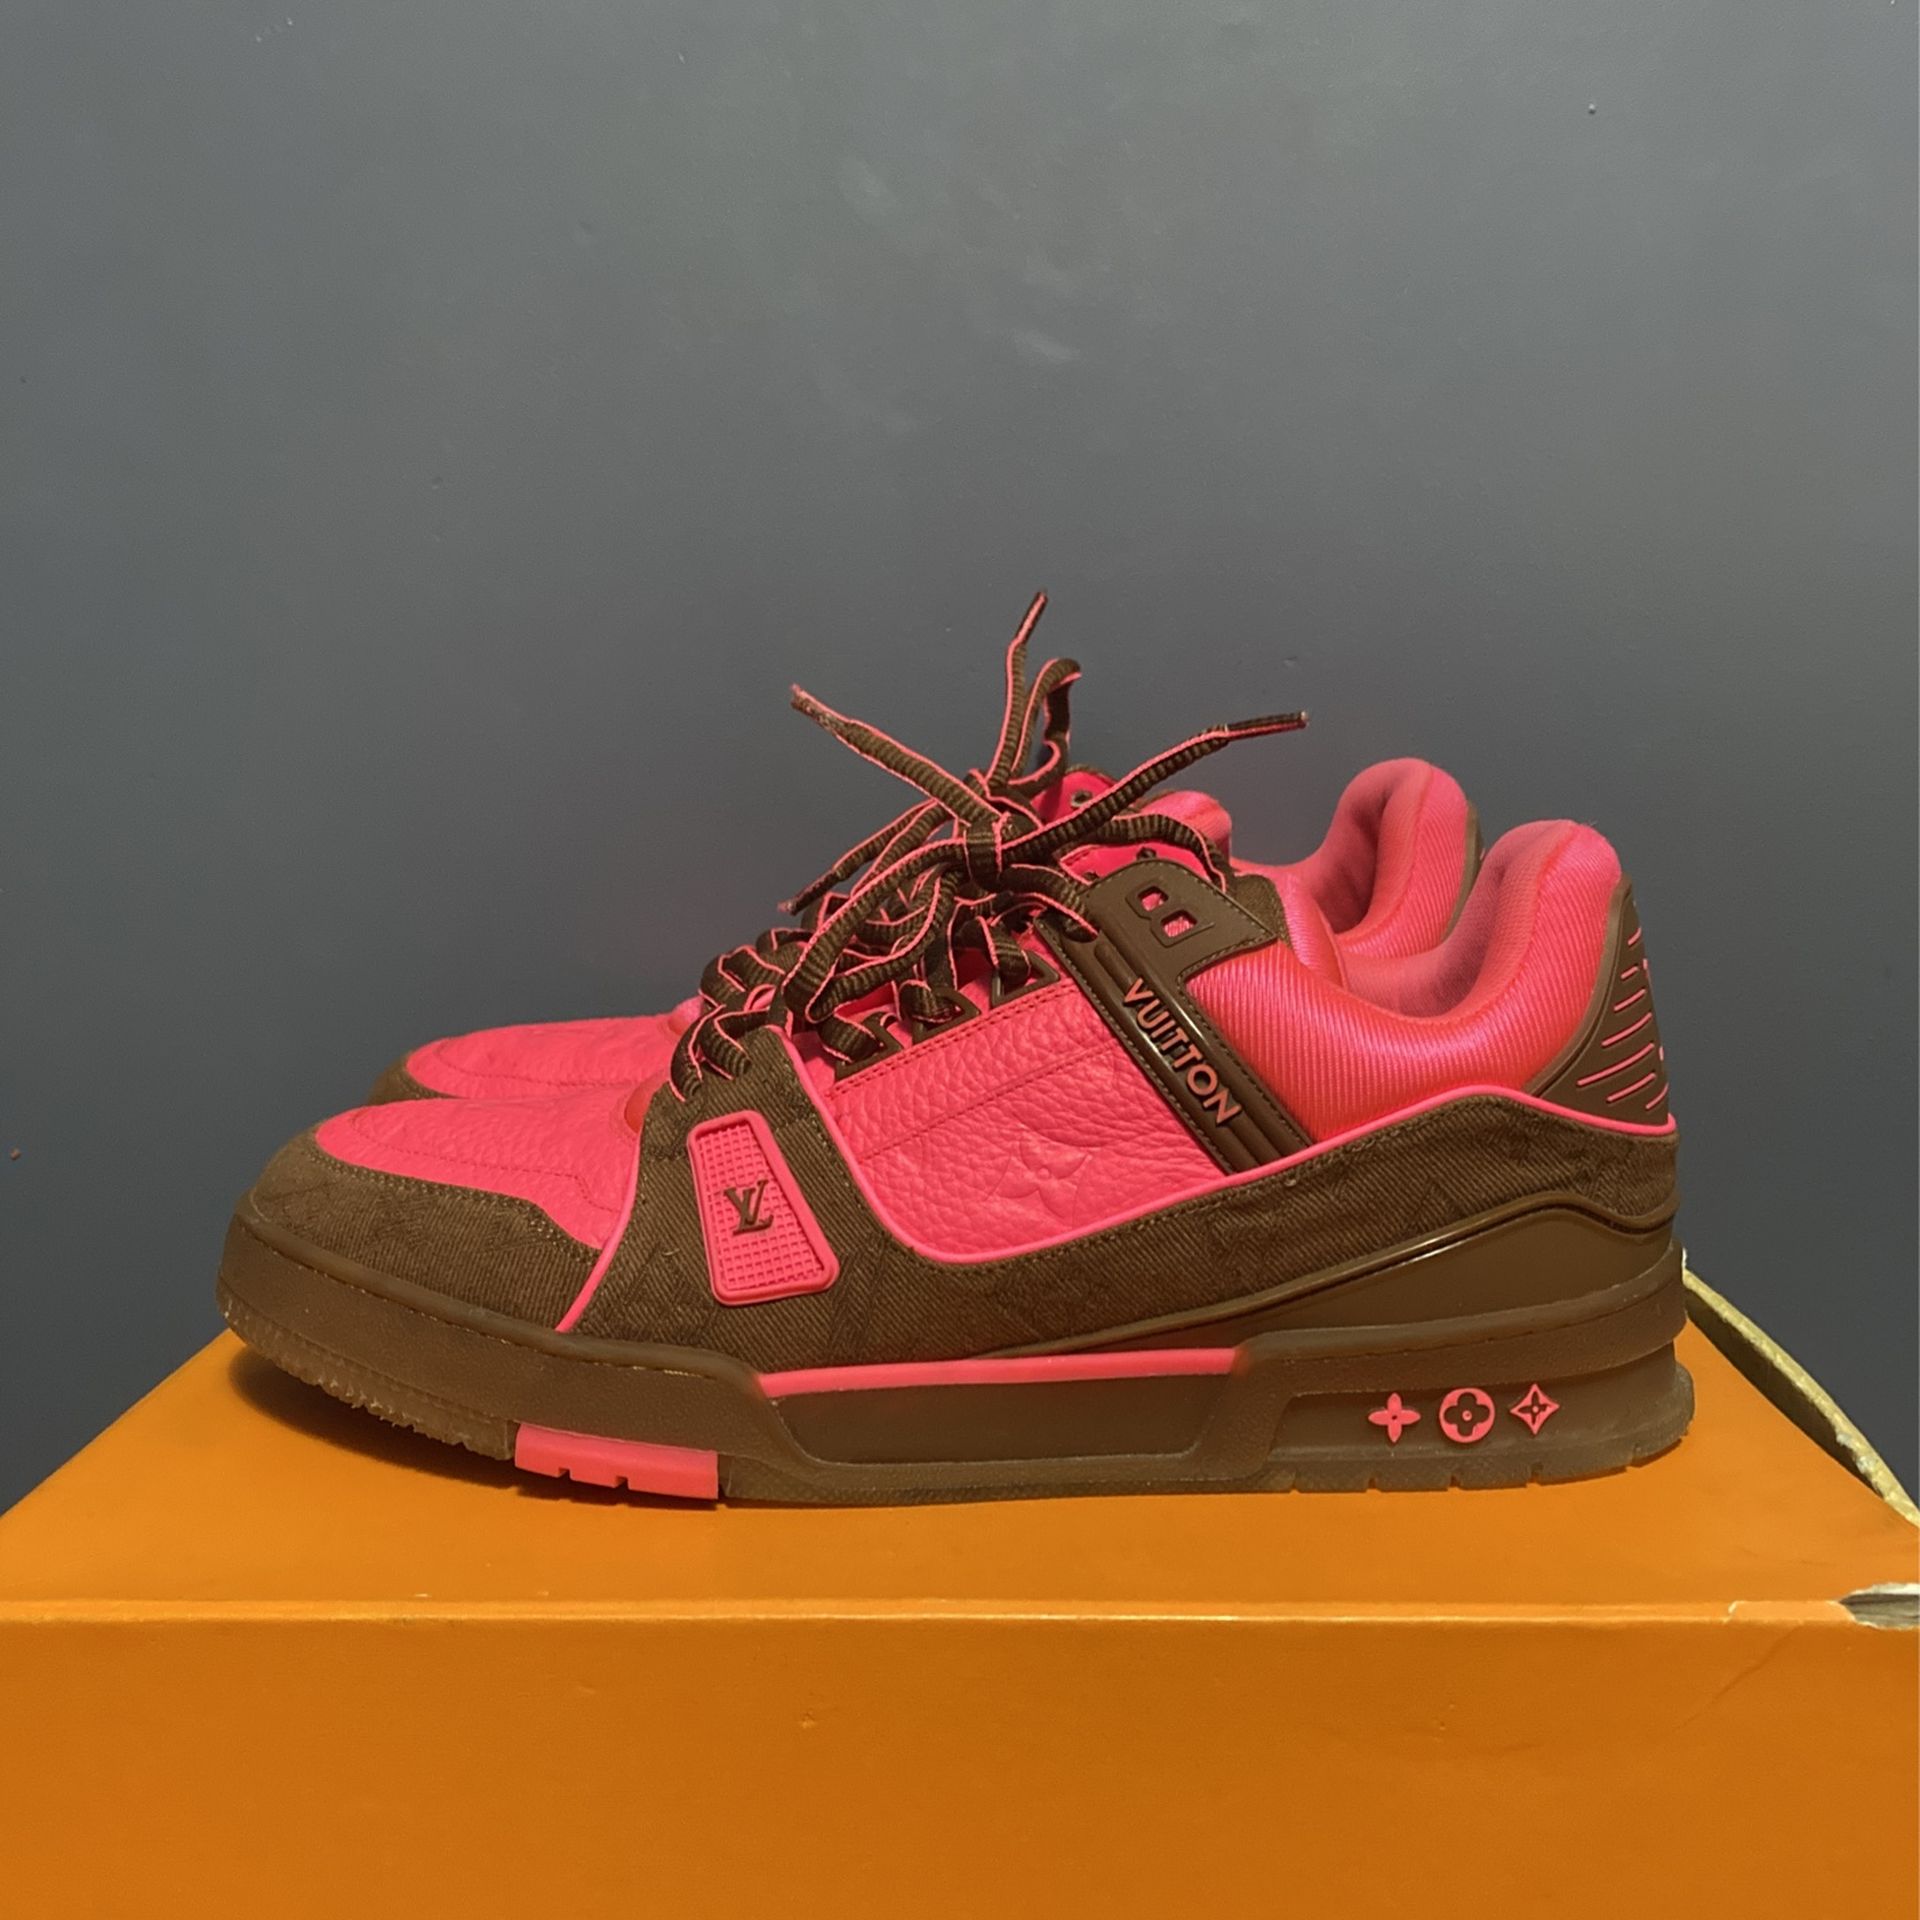 [NO BOX] LOUIS VUITTON LV TRAINER PINK WHITE NEW SNEAKERS SHOES SIZE 39 6.5  MEN 8 WOMEN A7 for Sale in Miami, FL - OfferUp